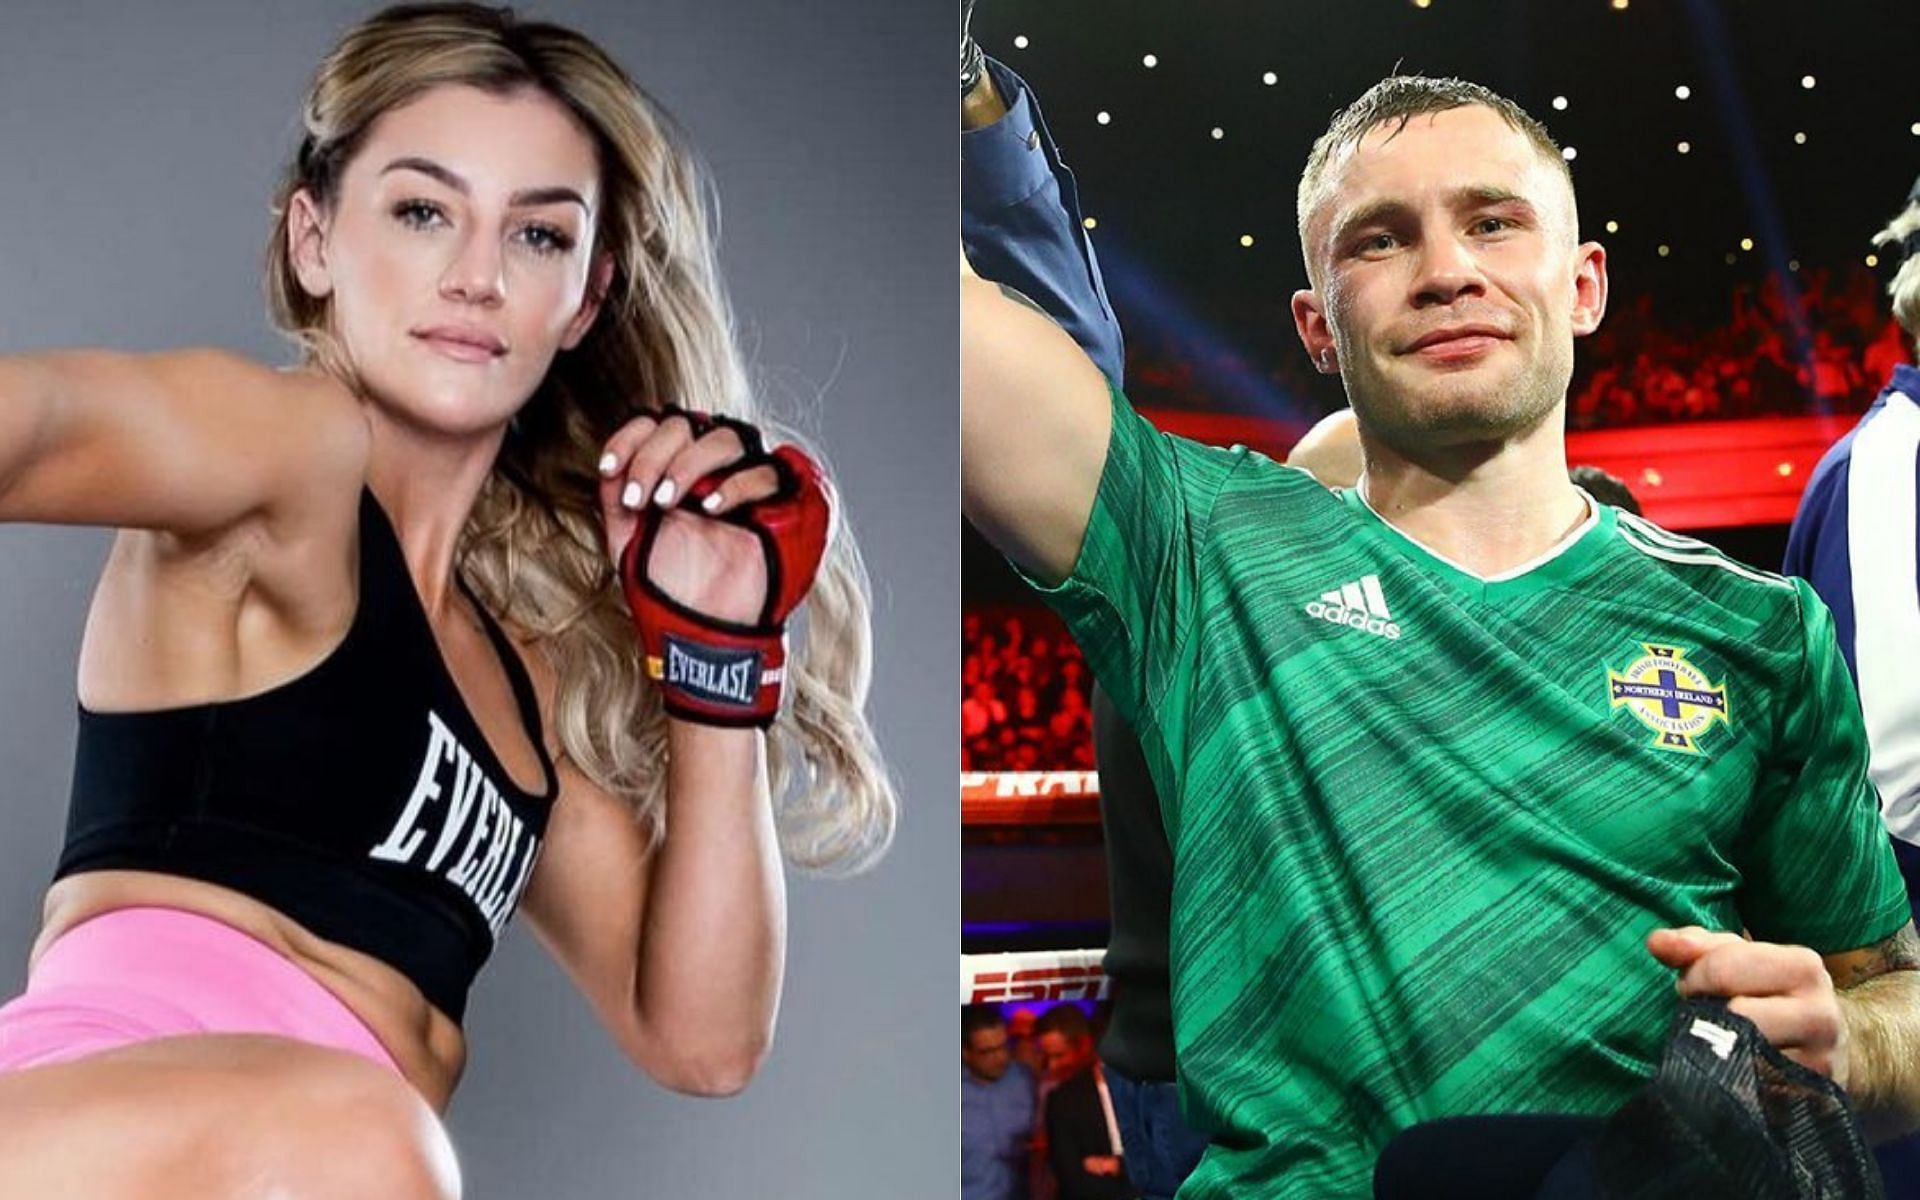 Leah McCourt (left) and Carl Frampton (right) [Image credits: @leahmccourtmma and @theframpton on Instagram]